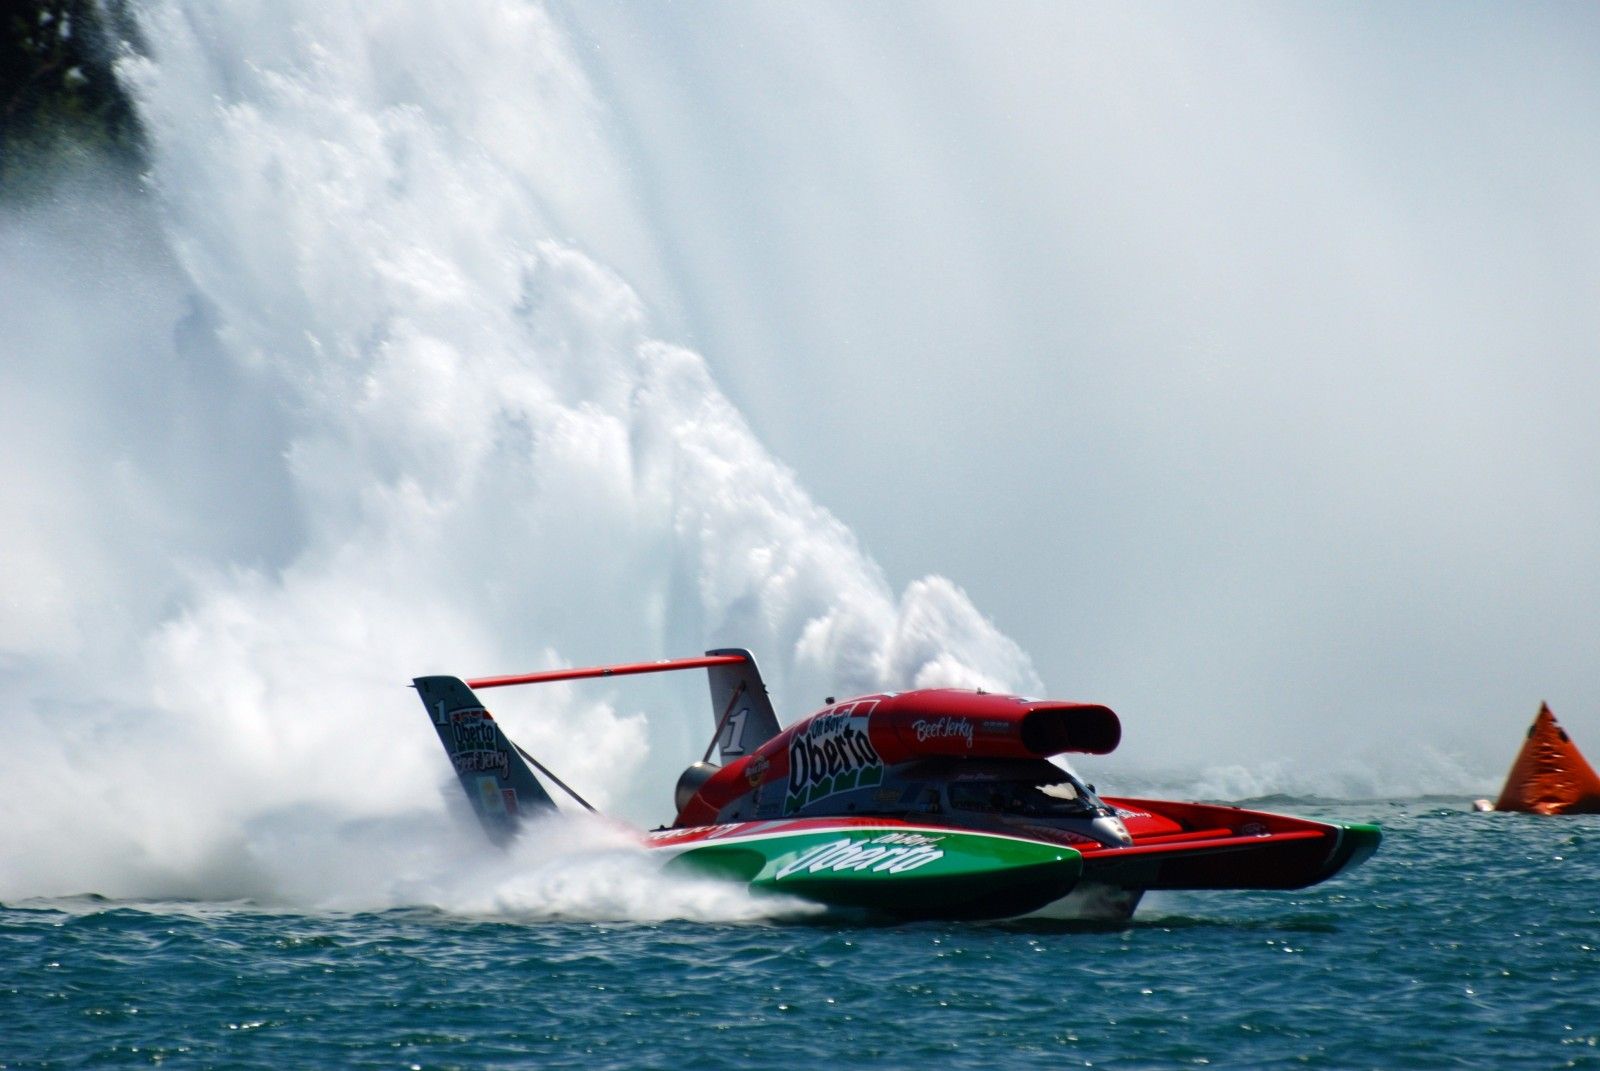 Wallpaper, sports, boat, sea, vehicle, photography, windsurfing, Water Splash, hydroplane, speedboat, sailing, watercraft, boating, motorsport, atmosphere of earth, extreme sport, powerboating, personal water craft, f1 powerboat racing, motorboat